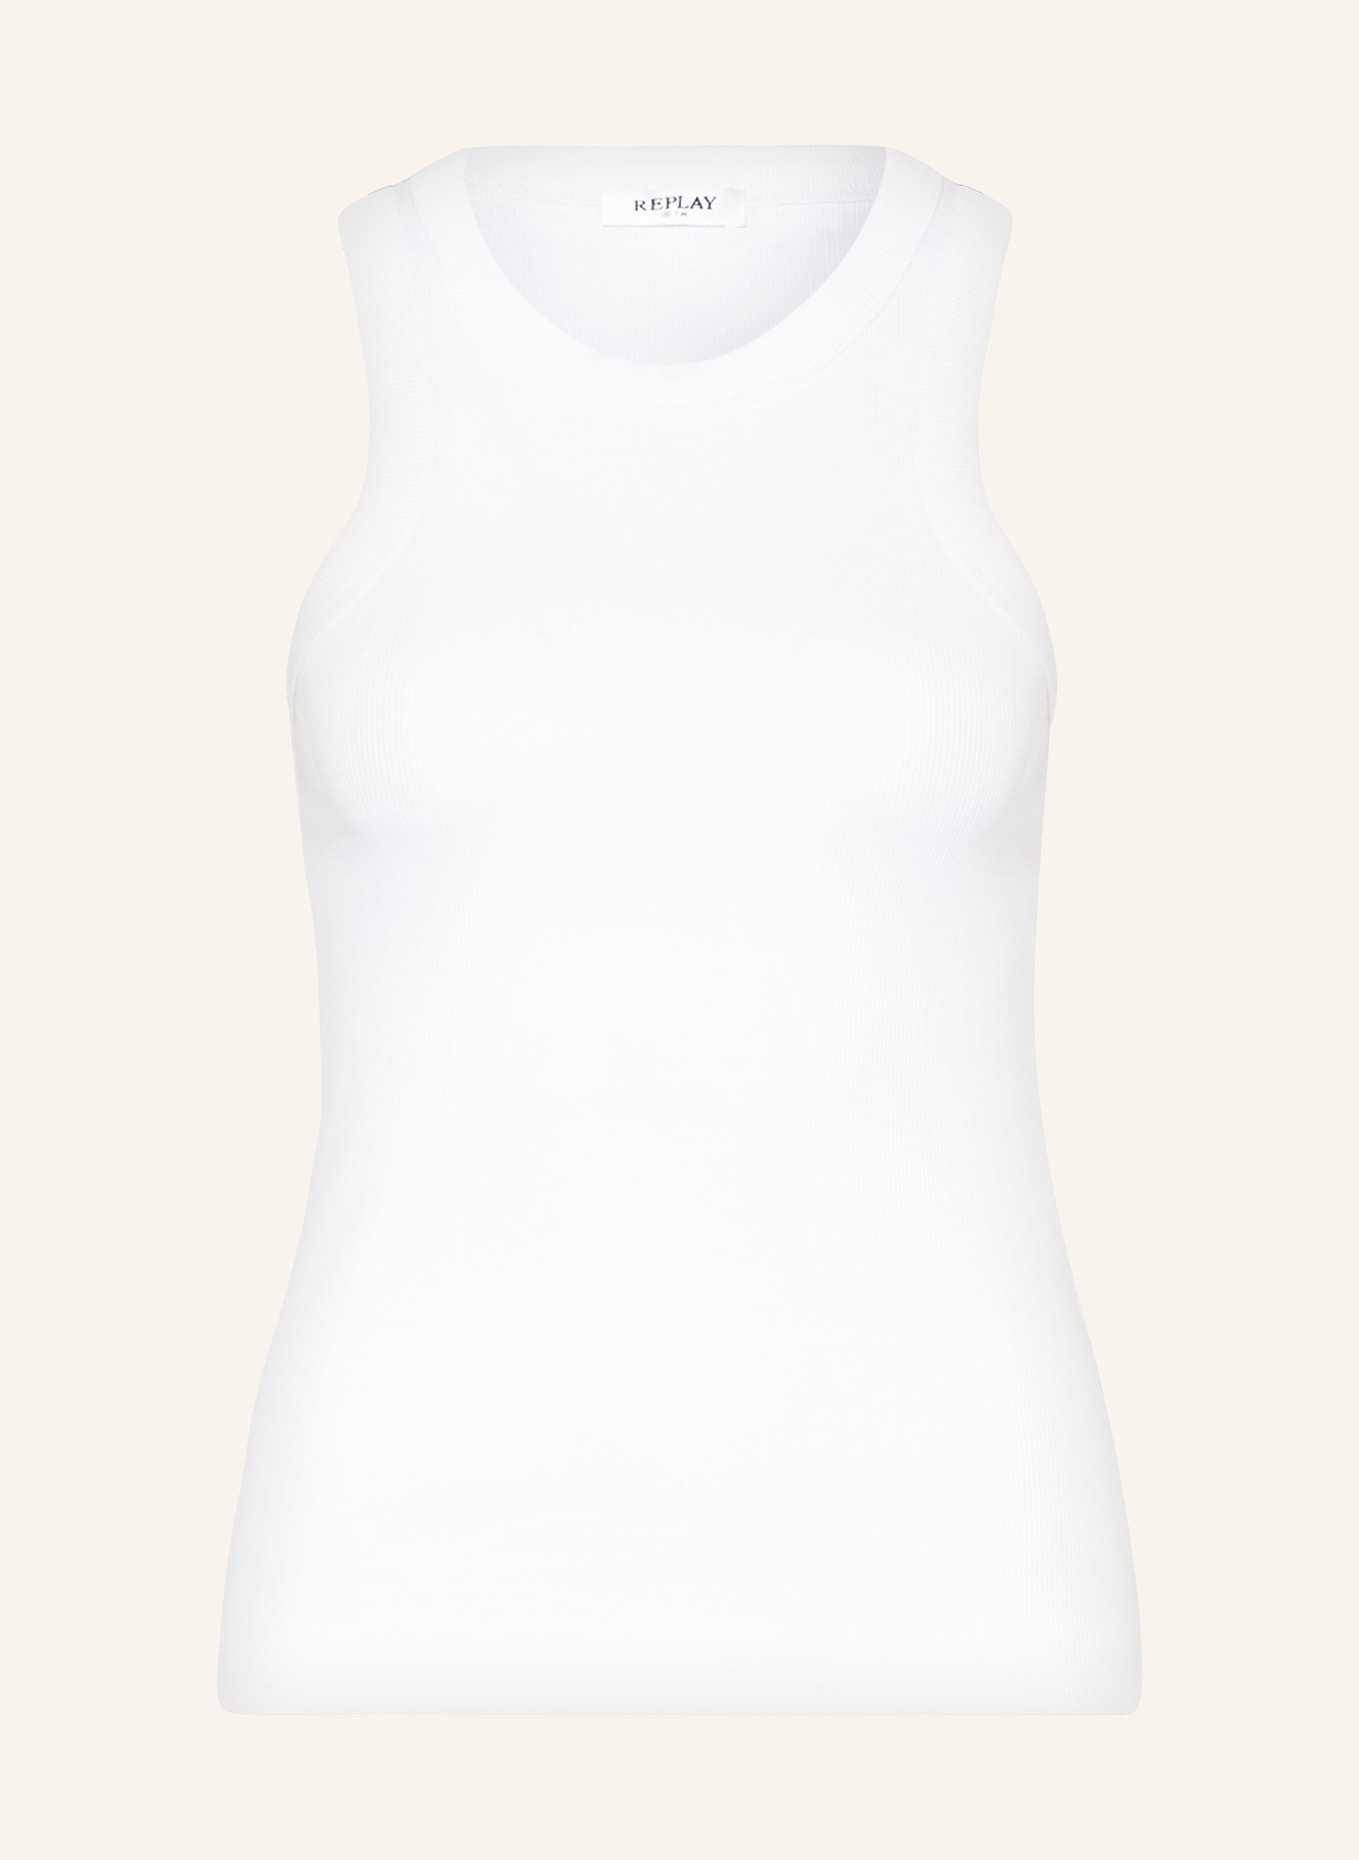 REPLAY Top, Color: WHITE (Image 1)